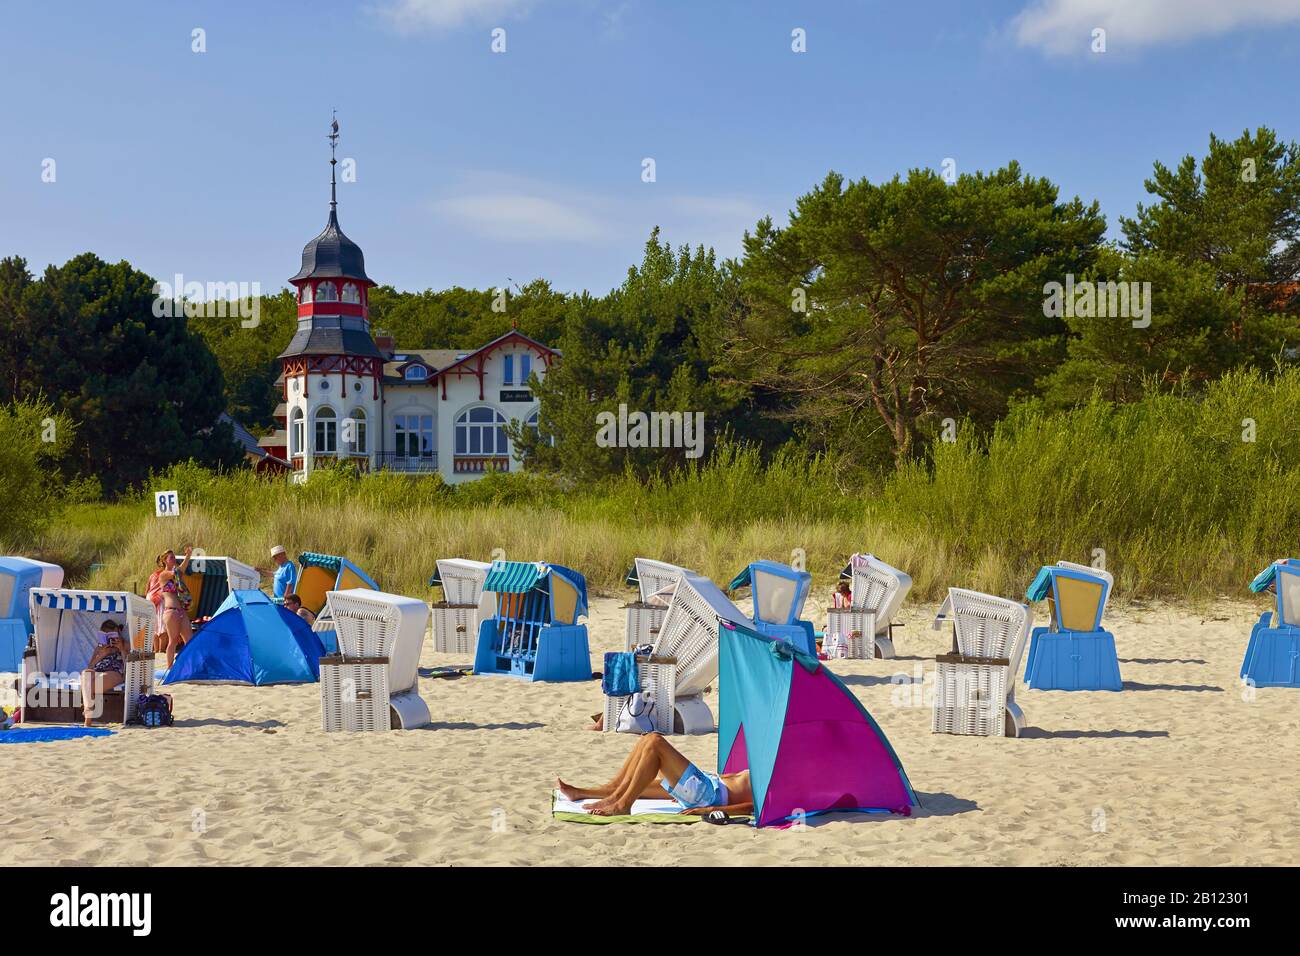 House by the sea with a beach in Ostseebad Zinnowitz, Usedom, Mecklenburg-West Pomerania, Germany Stock Photo